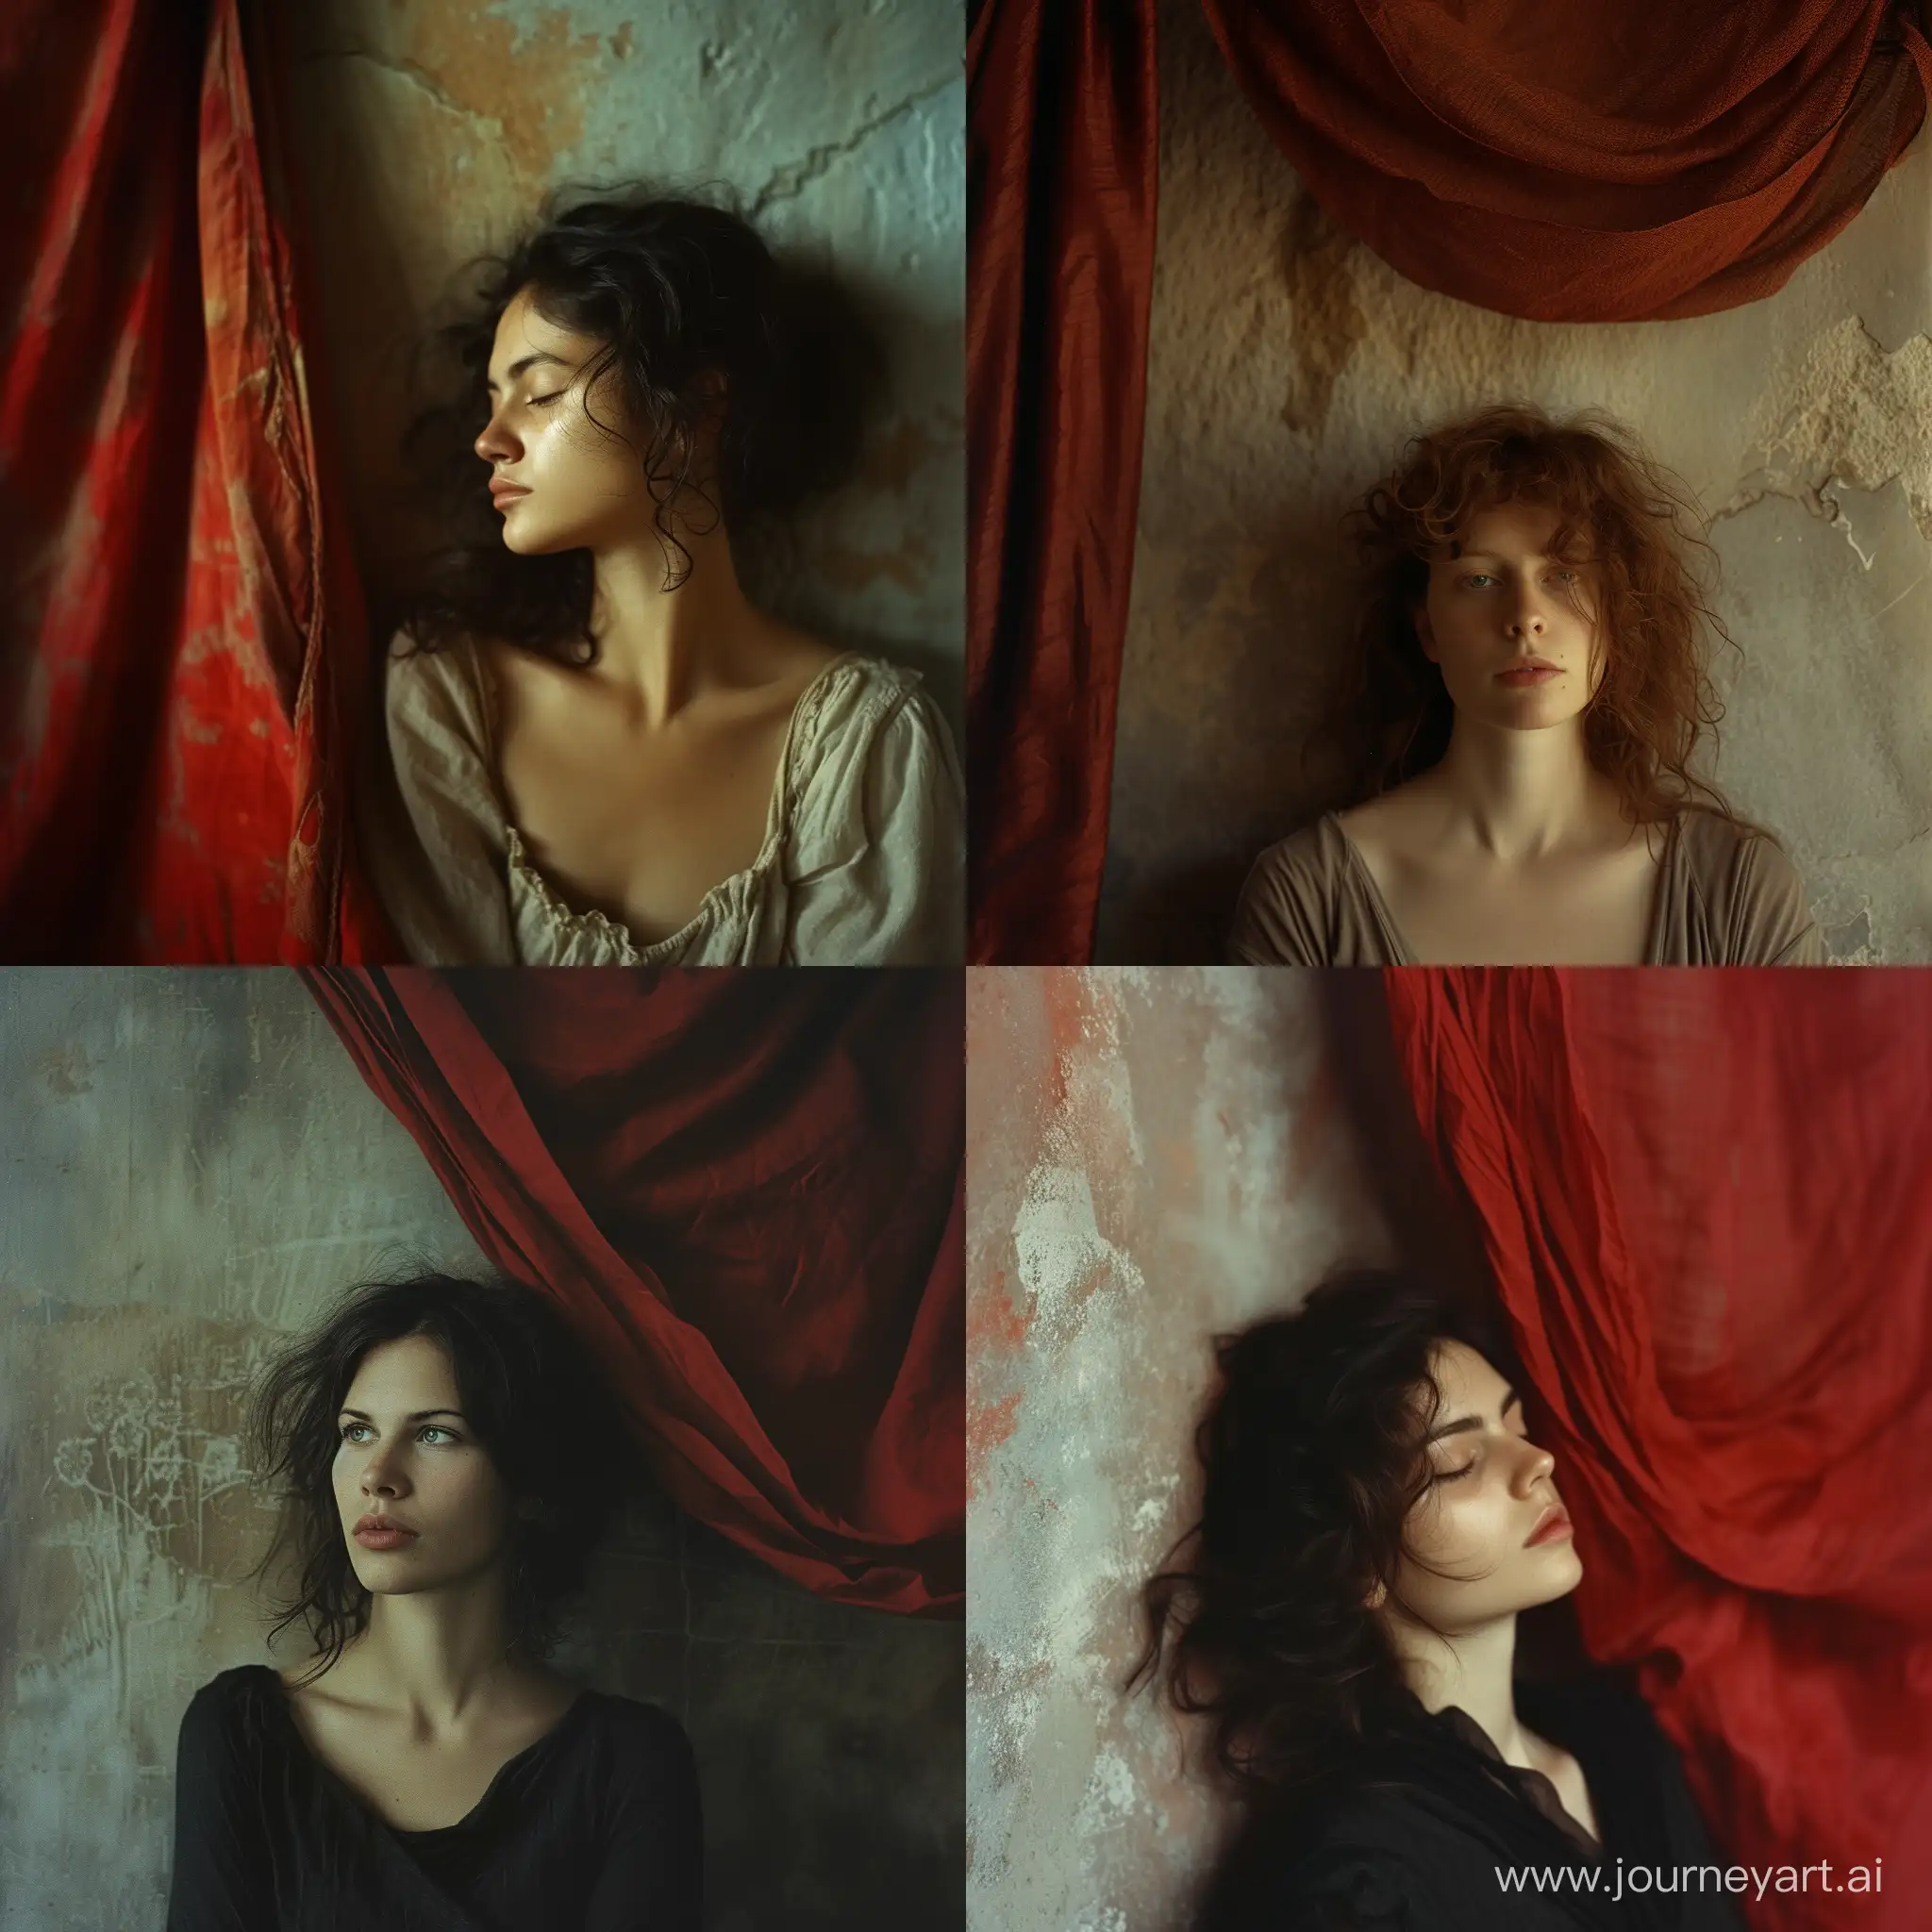 photographic portrait of a 40 years old, Italian woman, peaceful and relaxed expression, vivid  eye contact, wavy hair, leaning against an earth-colored wall with a red drape hanging from the ceiling, Shot with Kodak Portra 160::2 by Katia Chausheva::2